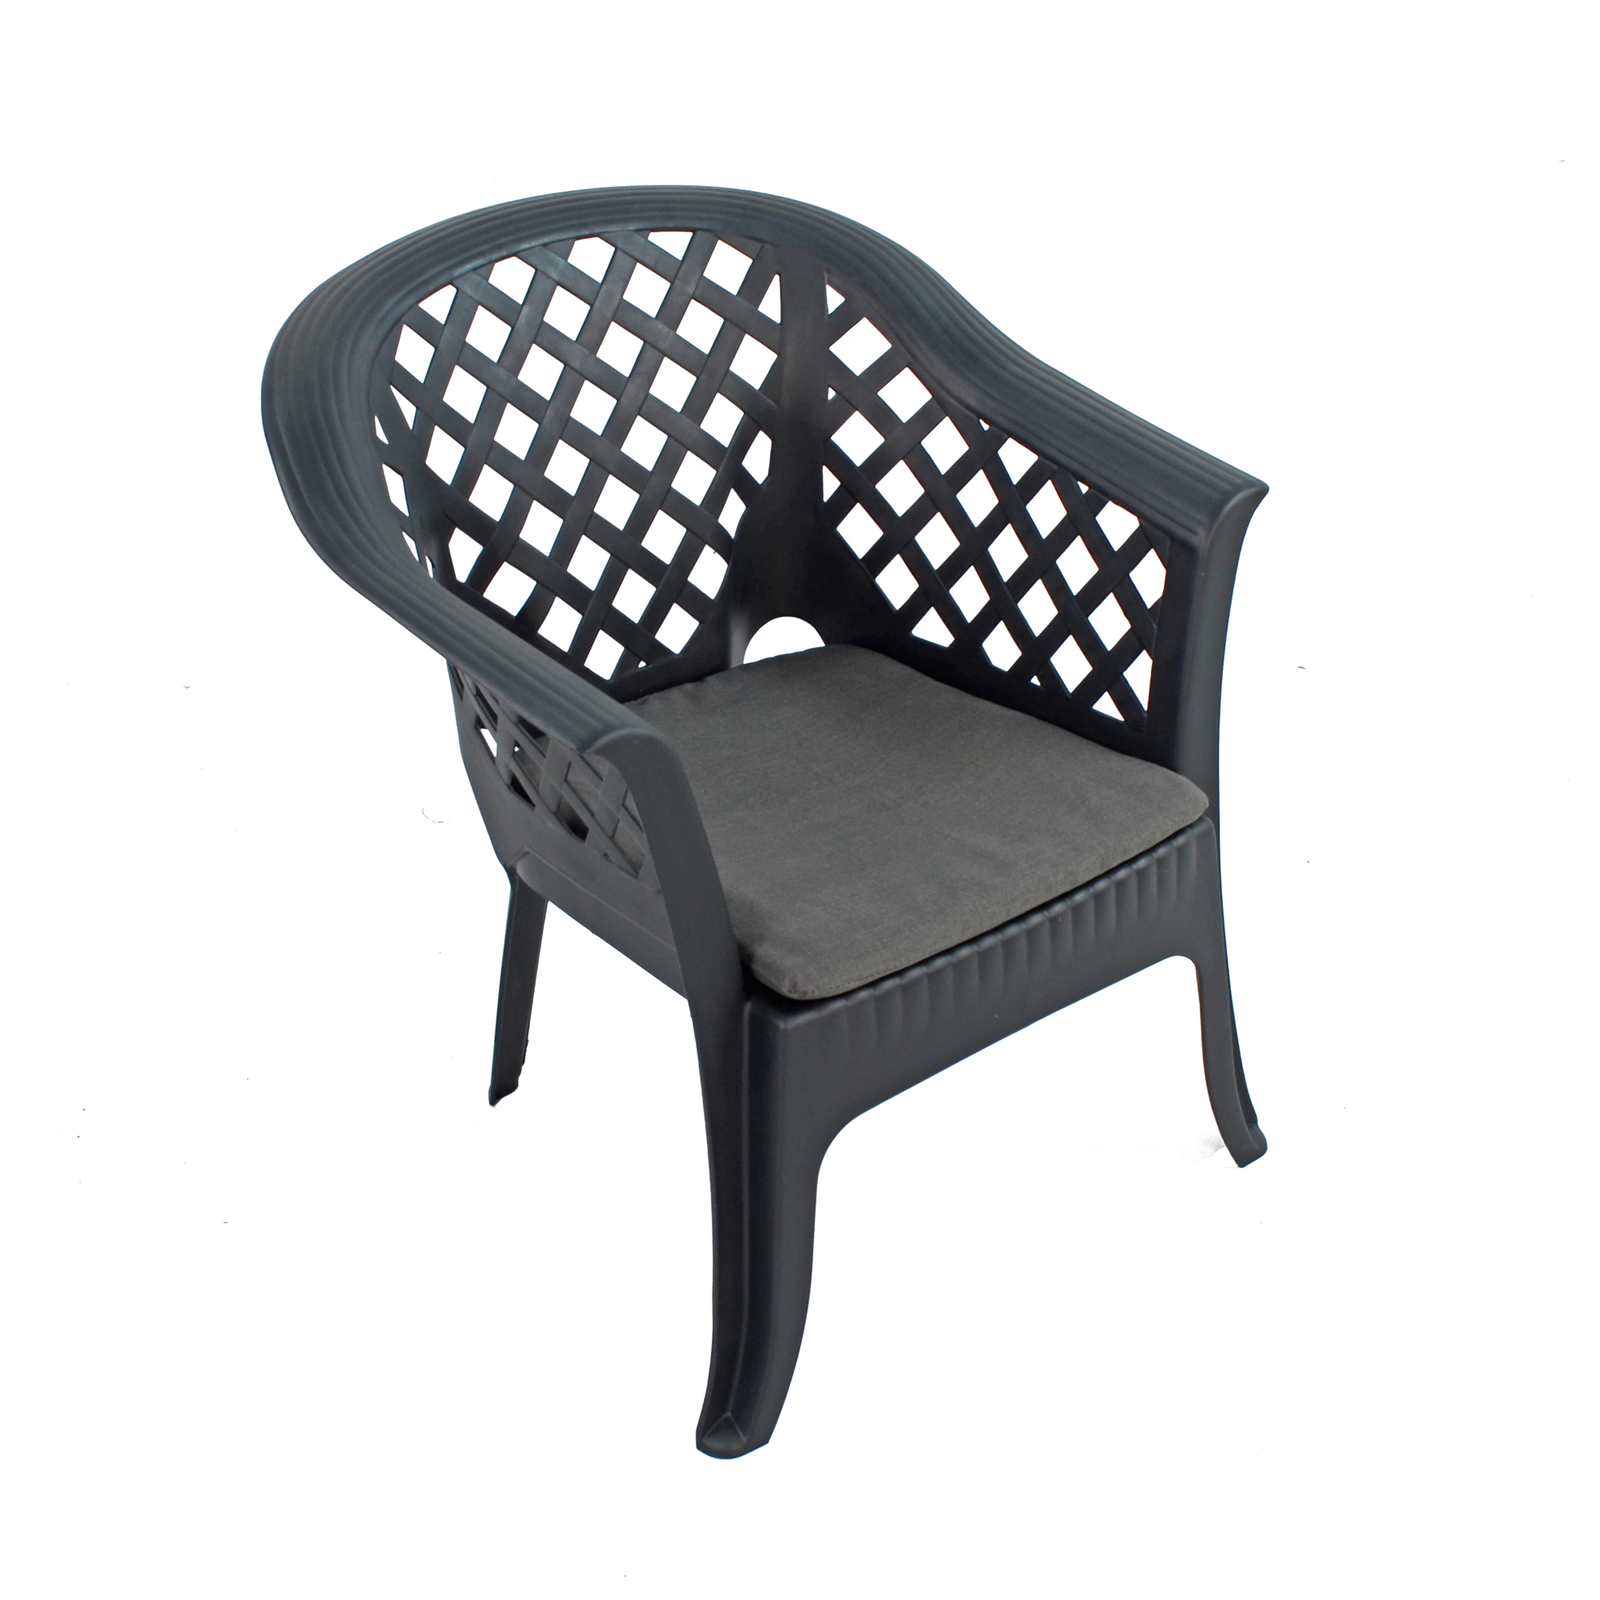 Trabella Savona Chair Anthracite (Pack of 2) Chairs Trabella   